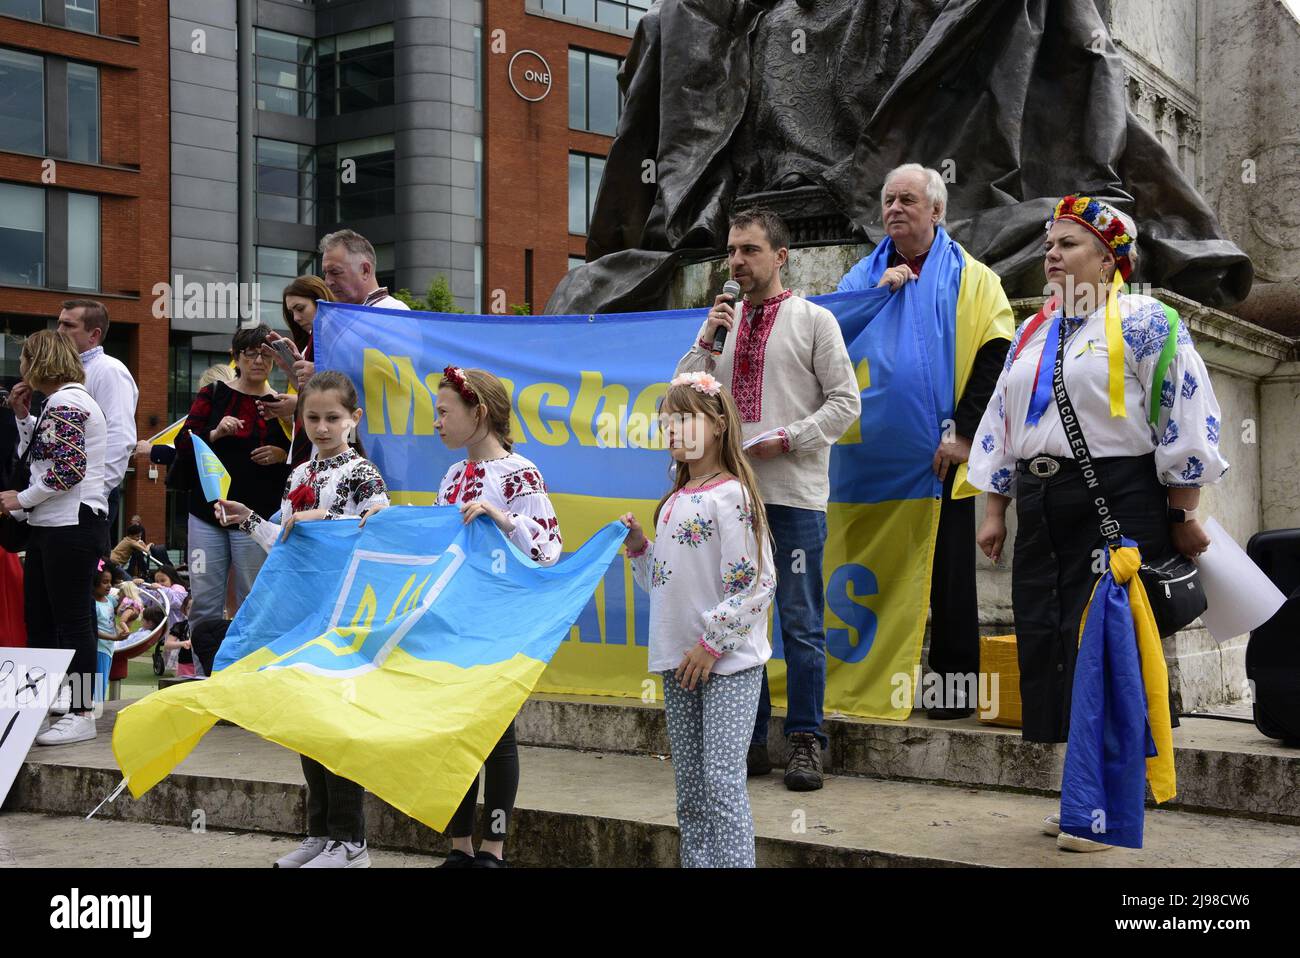 Manchester, UK, 21st May, 2022. “Stand with Ukraine” anti-war rally and embroidered shirt city centre march, a protest about the Russian invasion of Ukraine in Piccadilly Gardens, central Manchester, England, United Kingdom, British Isles. Some protesters wore embroidered shirts in the Ukrainian cultural style. Credit: Terry Waller/Alamy Live News Stock Photo